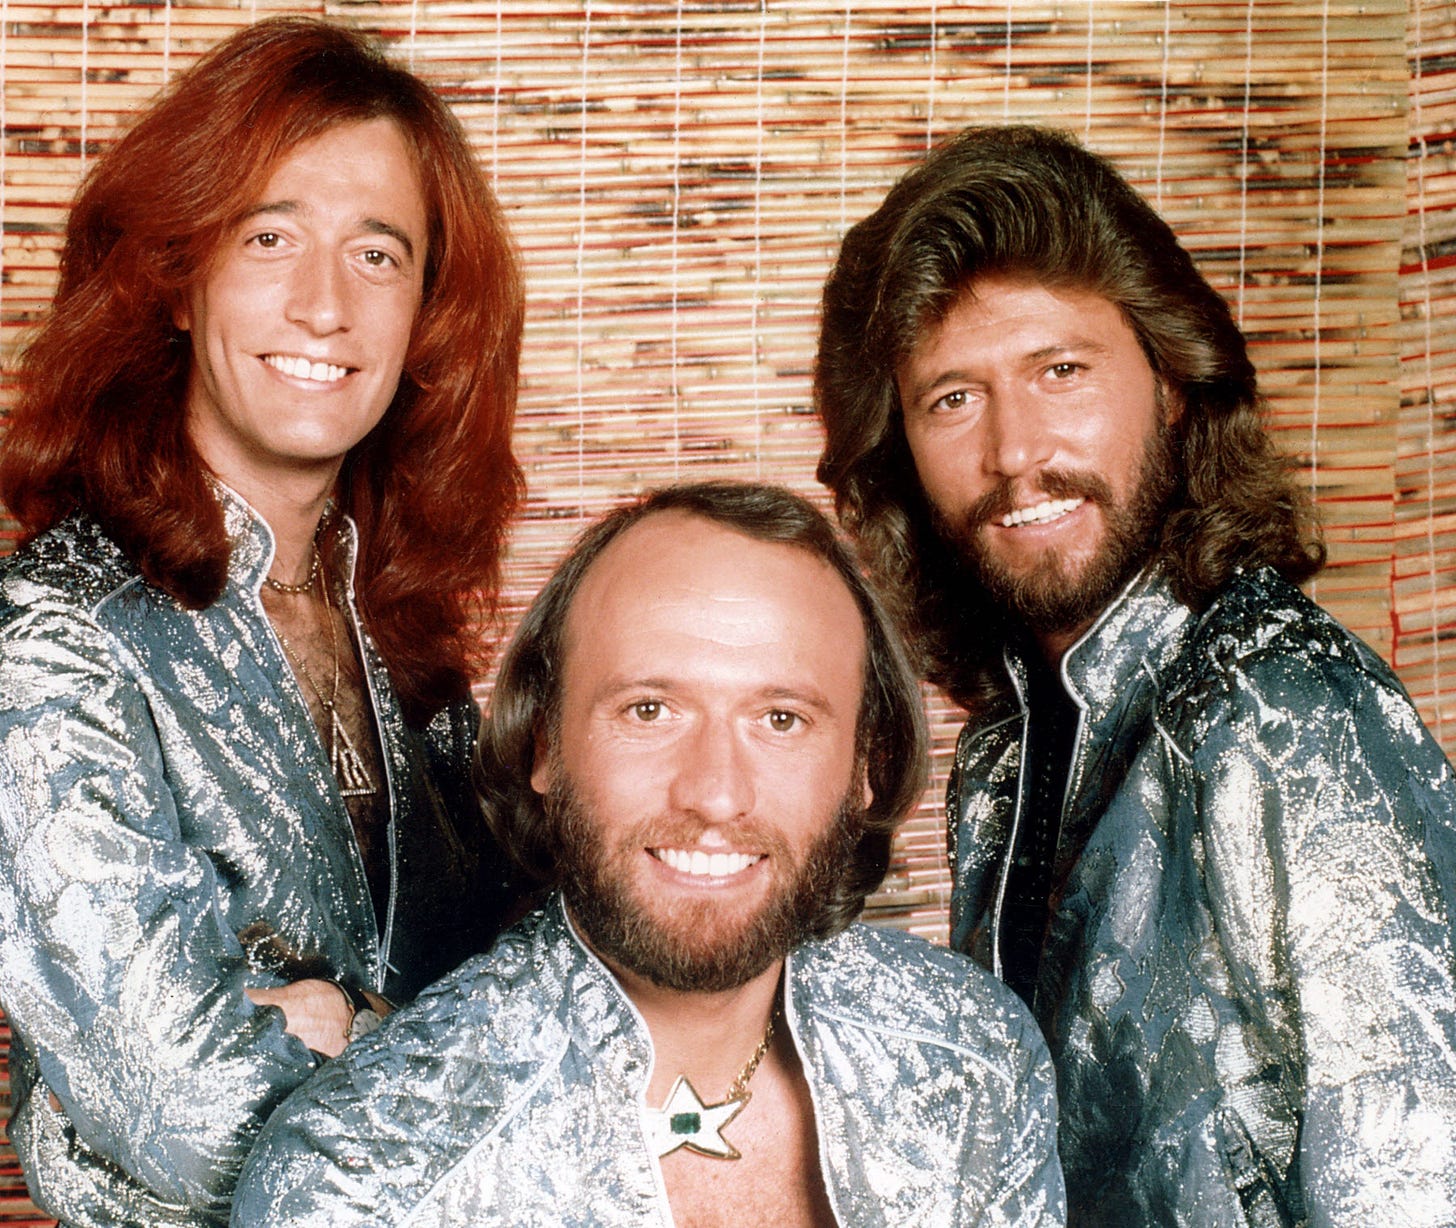 How the Bee Gees went from No. 1 to national pariahs